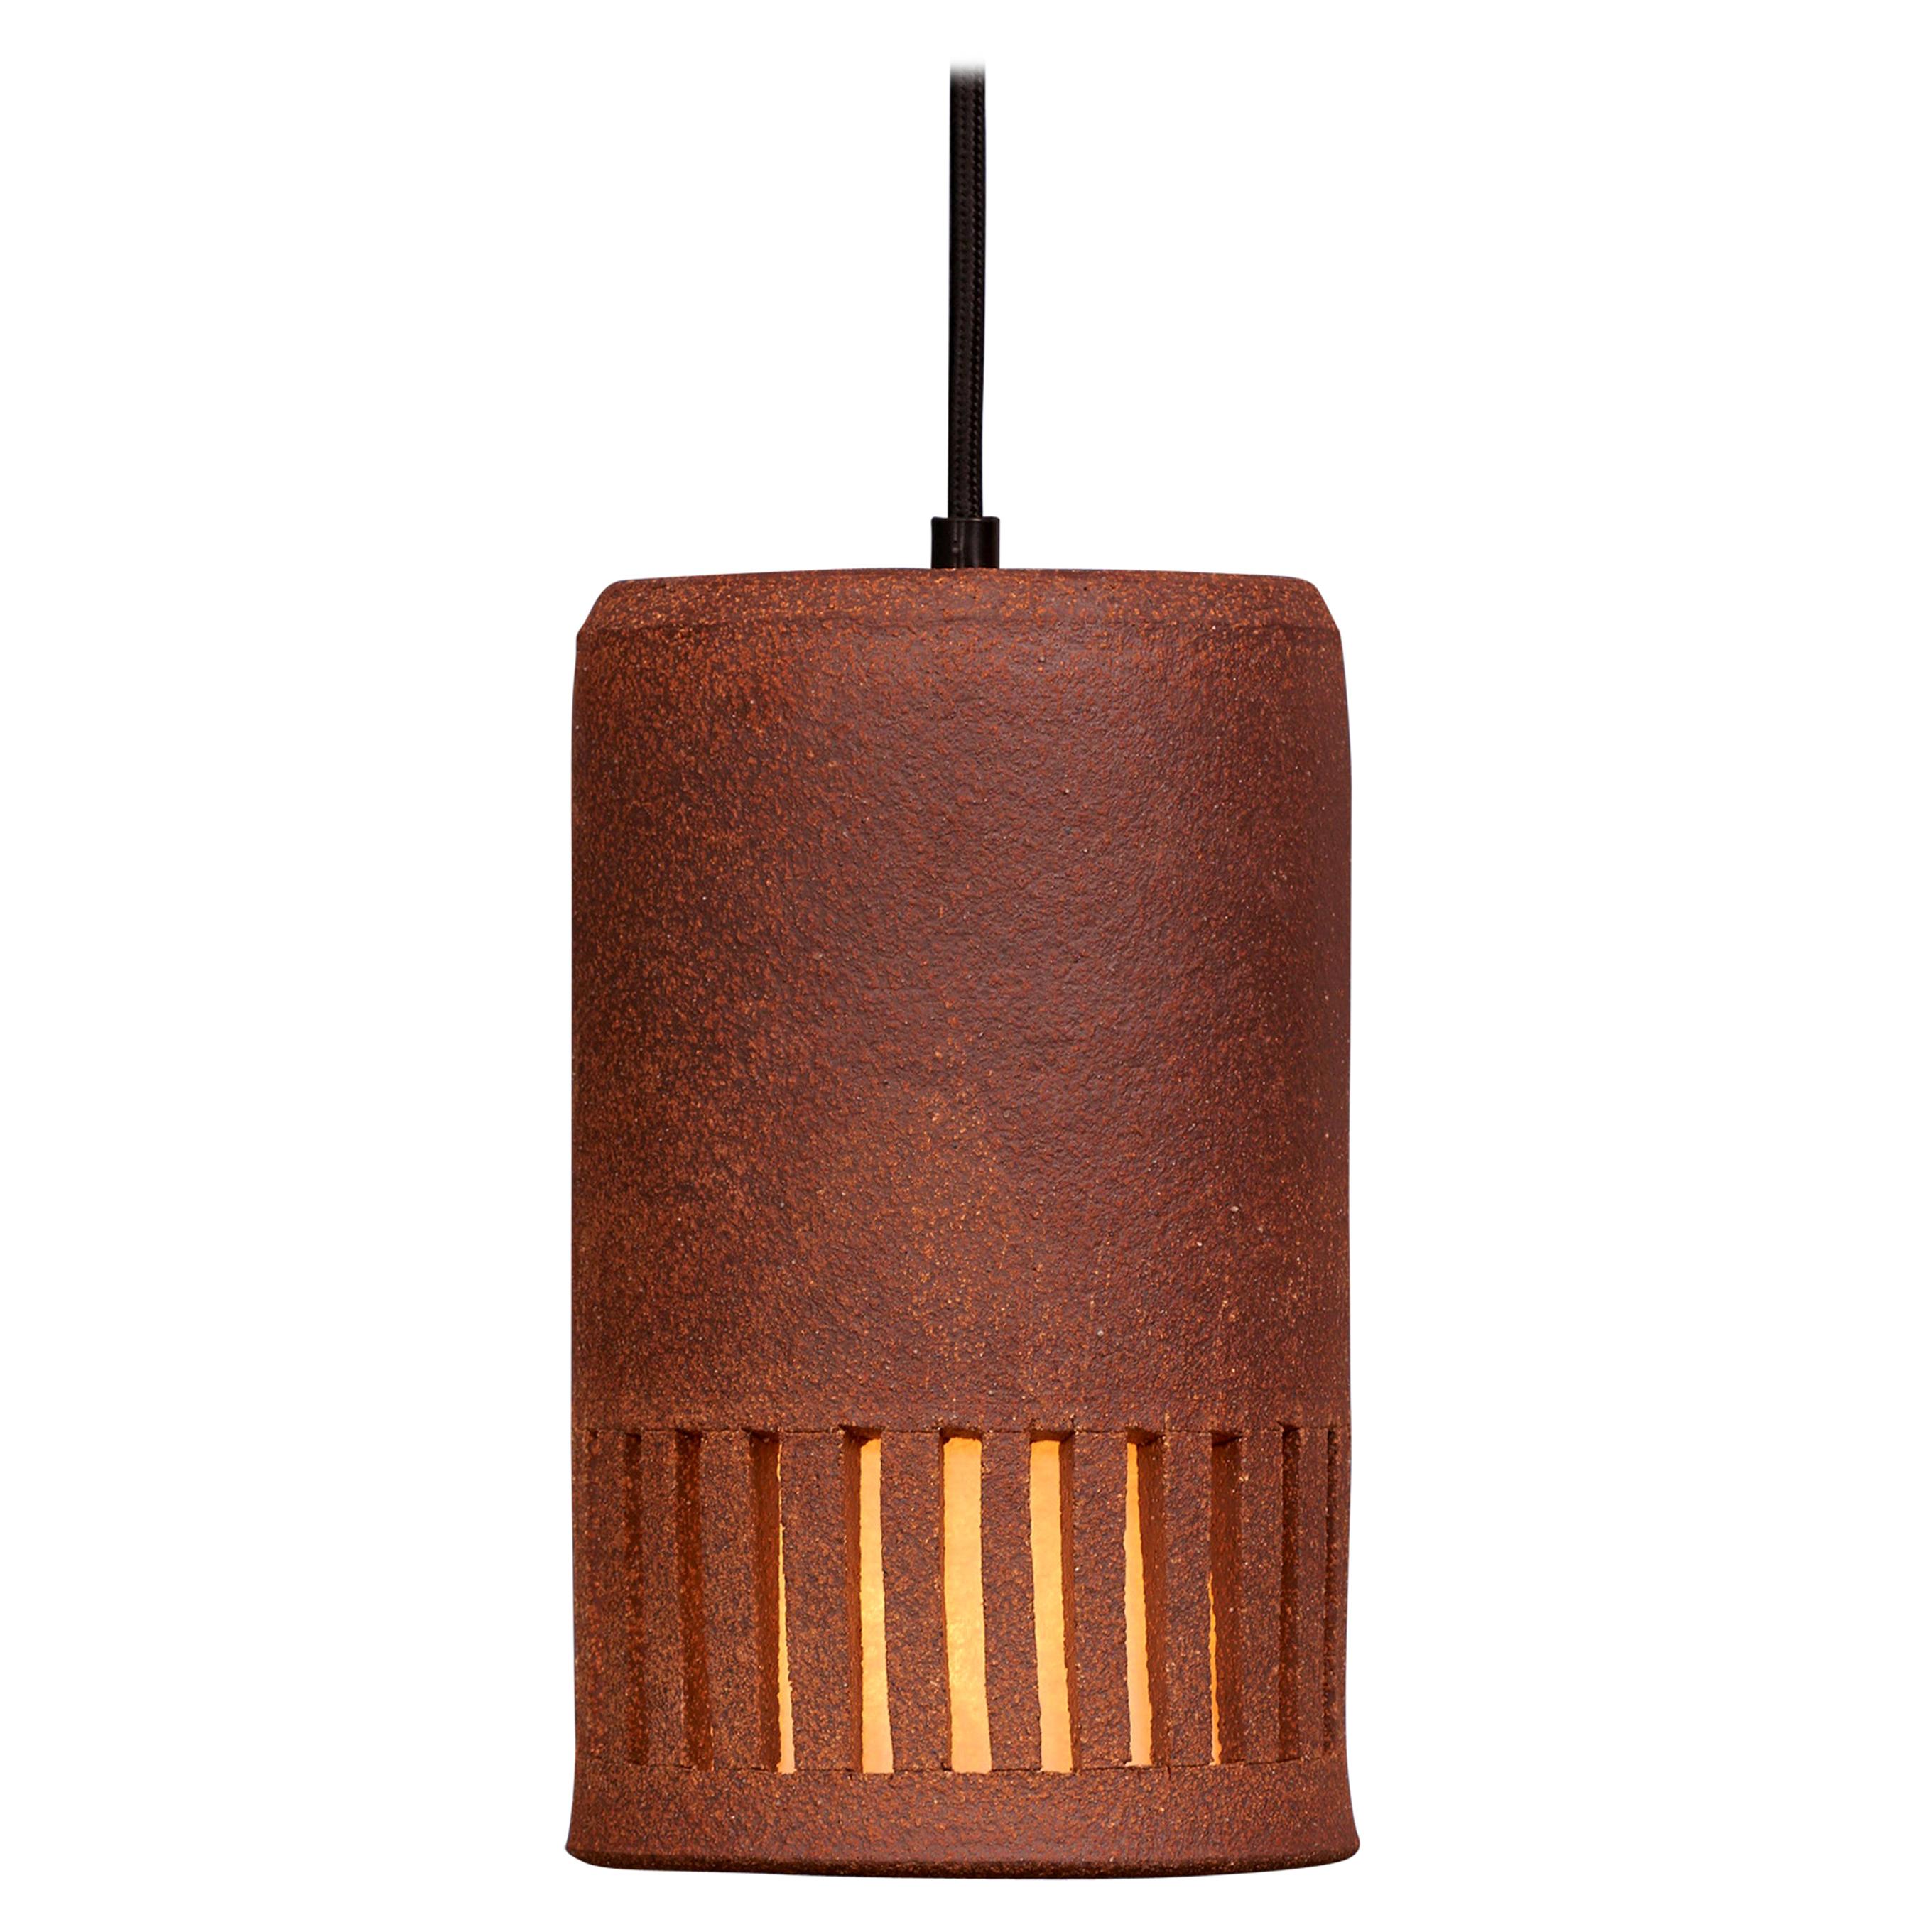 Clay Outdoor Hanging Light HL 20 by Brent J. Bennett, US